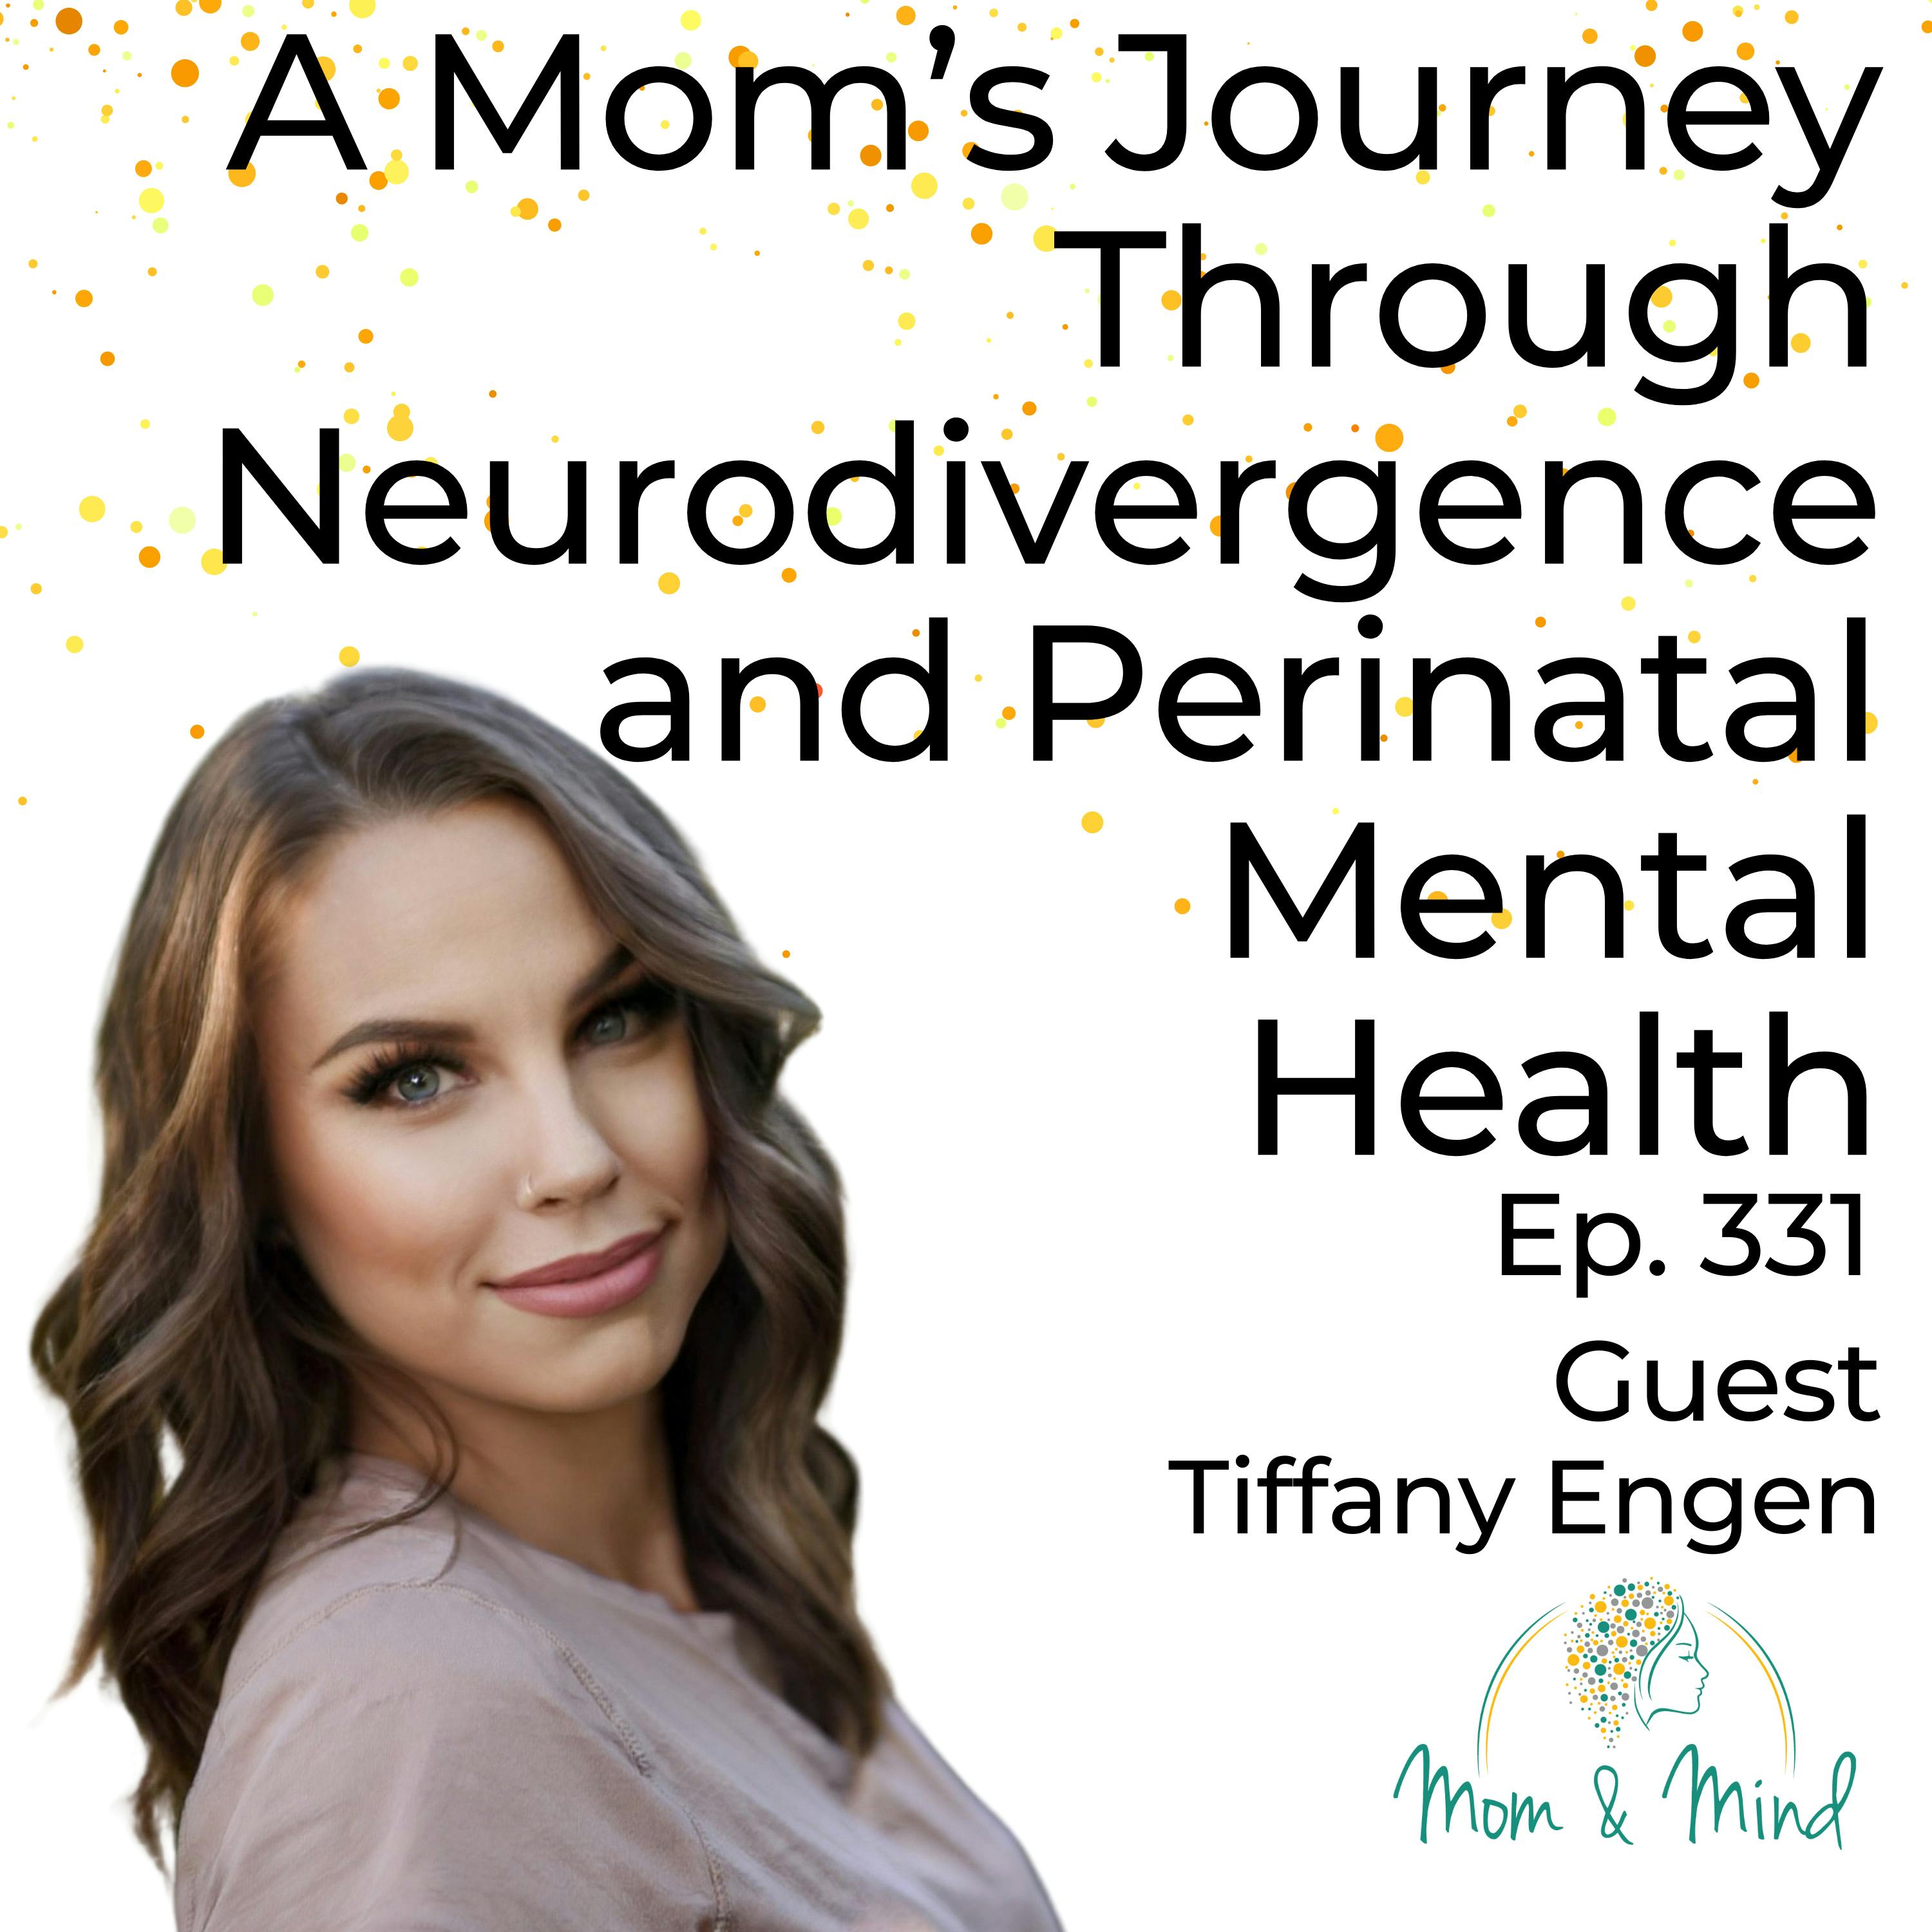 331: A Mom’s Journey Through Neurodivergence and Perinatal Mental  Health